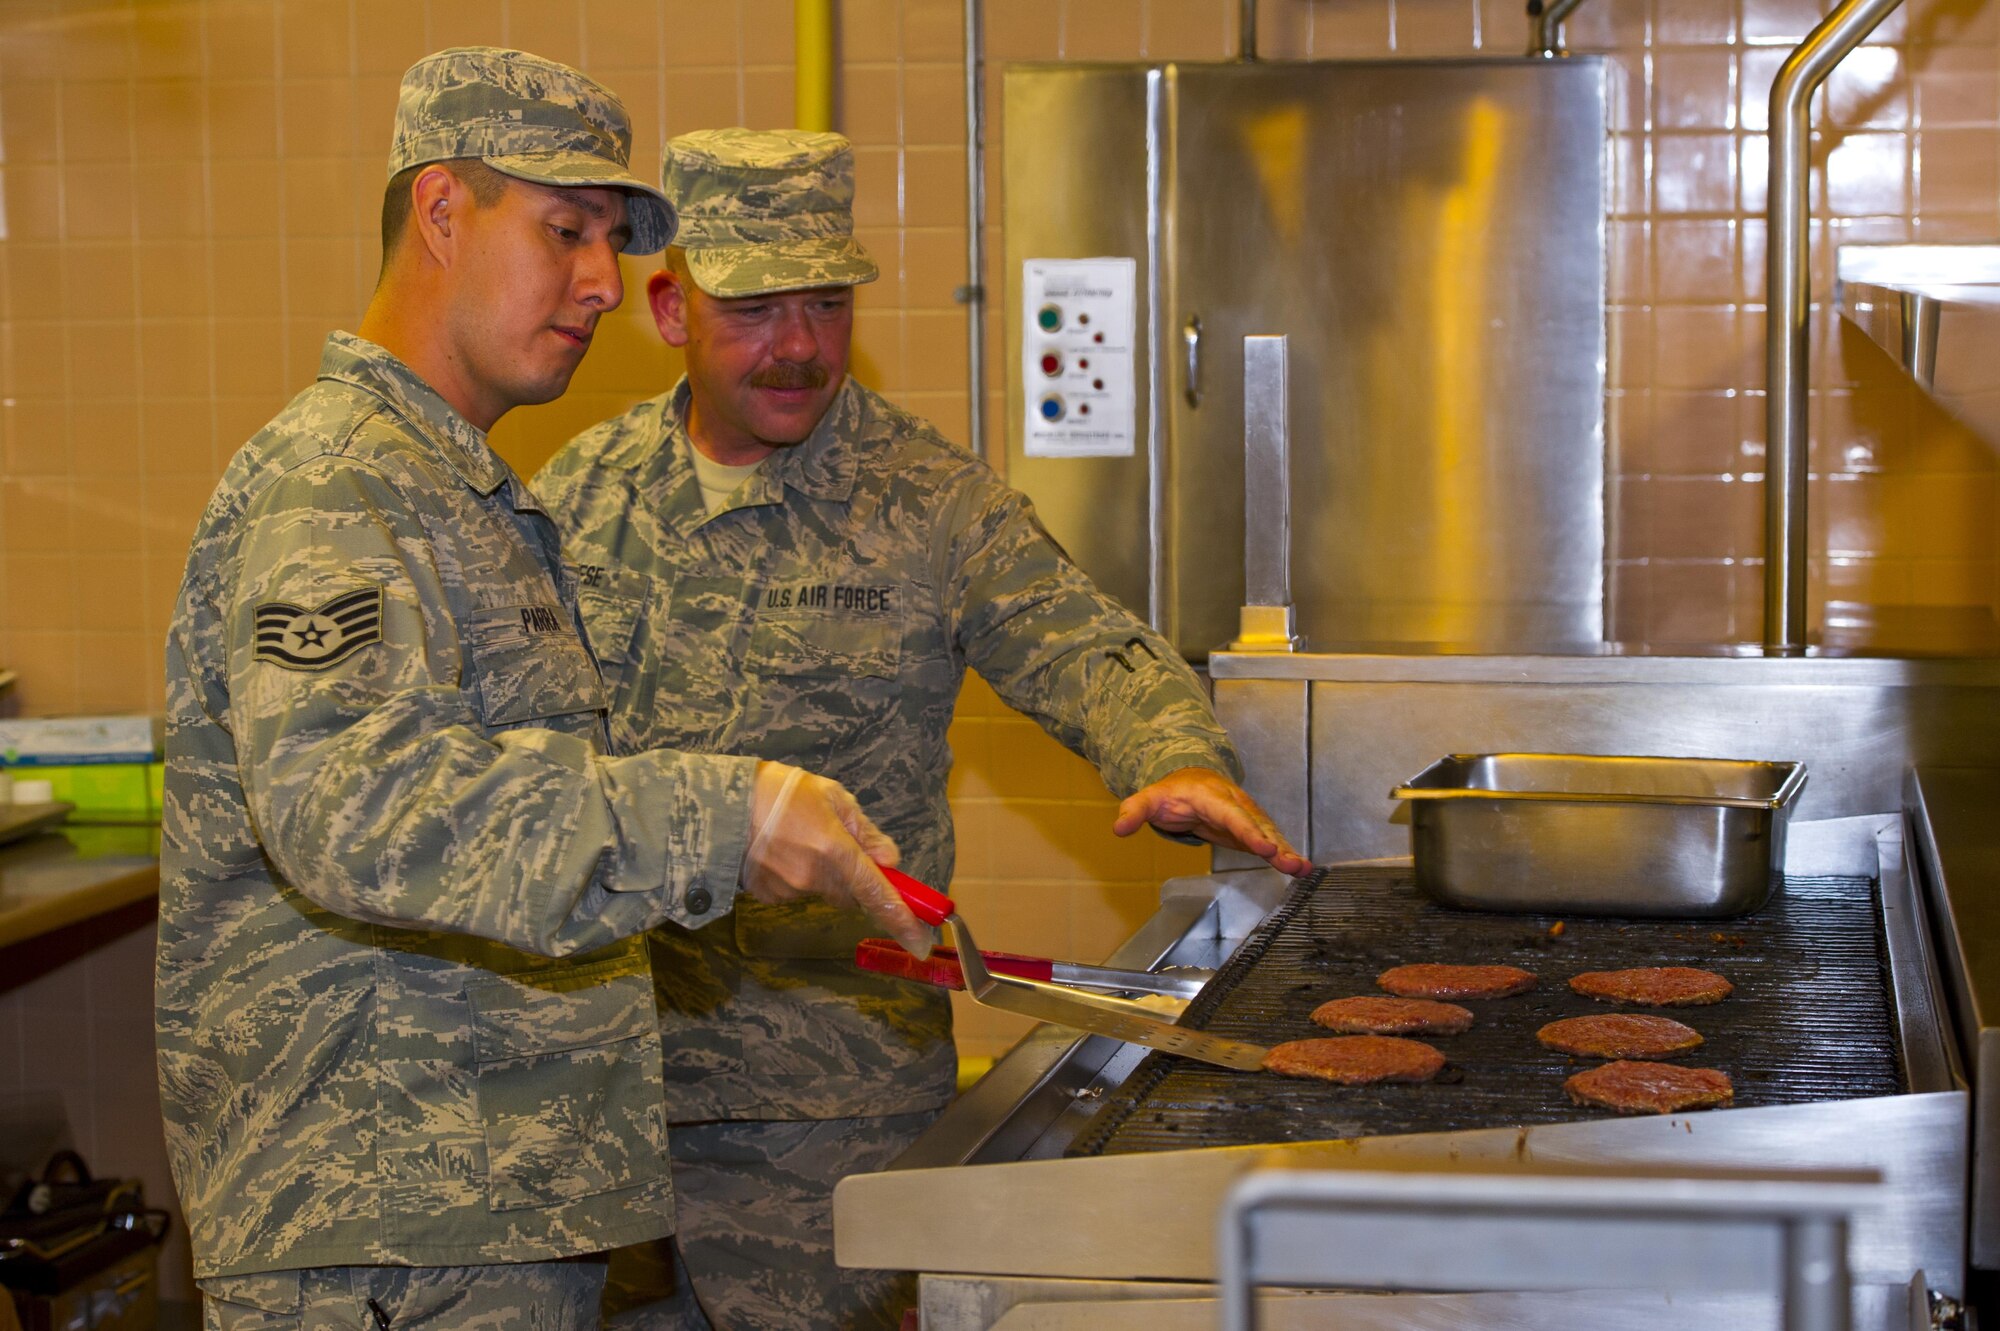 Staff Sgt. Alan Reese and Staff Sgt. Allan Parra, 926th Force Support Squadron service apprentices, prepare hamburger patties on a grill May 13, 2016, at the Crosswinds Dining Facility. The training for the 926th FSS Airmen is to provide additional tools to help them be successful in progressing.